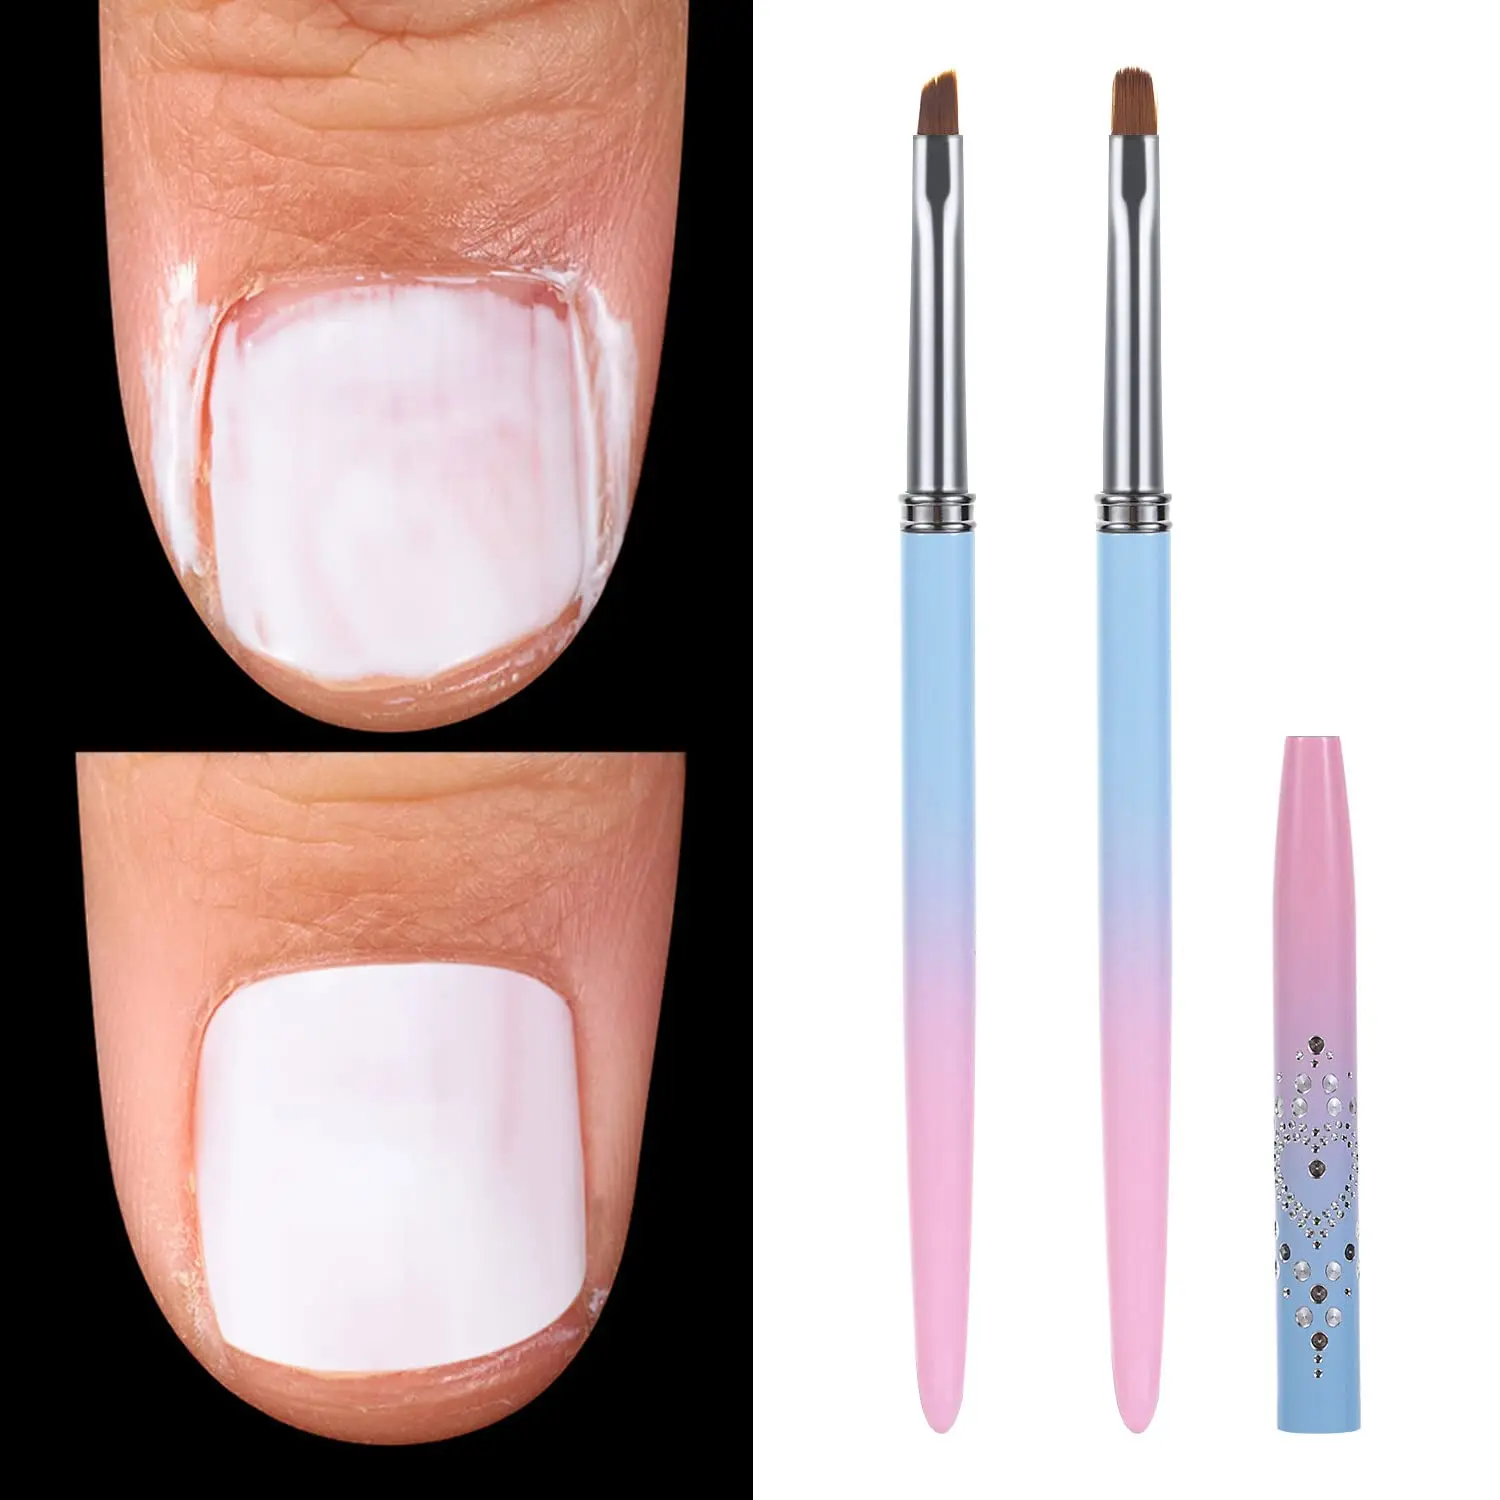 

Nail Art Clean Up Brushes Round and Angled Nail Brushes for Cleaning Polish Mistake on the Cuticles for Nail Art and Designs